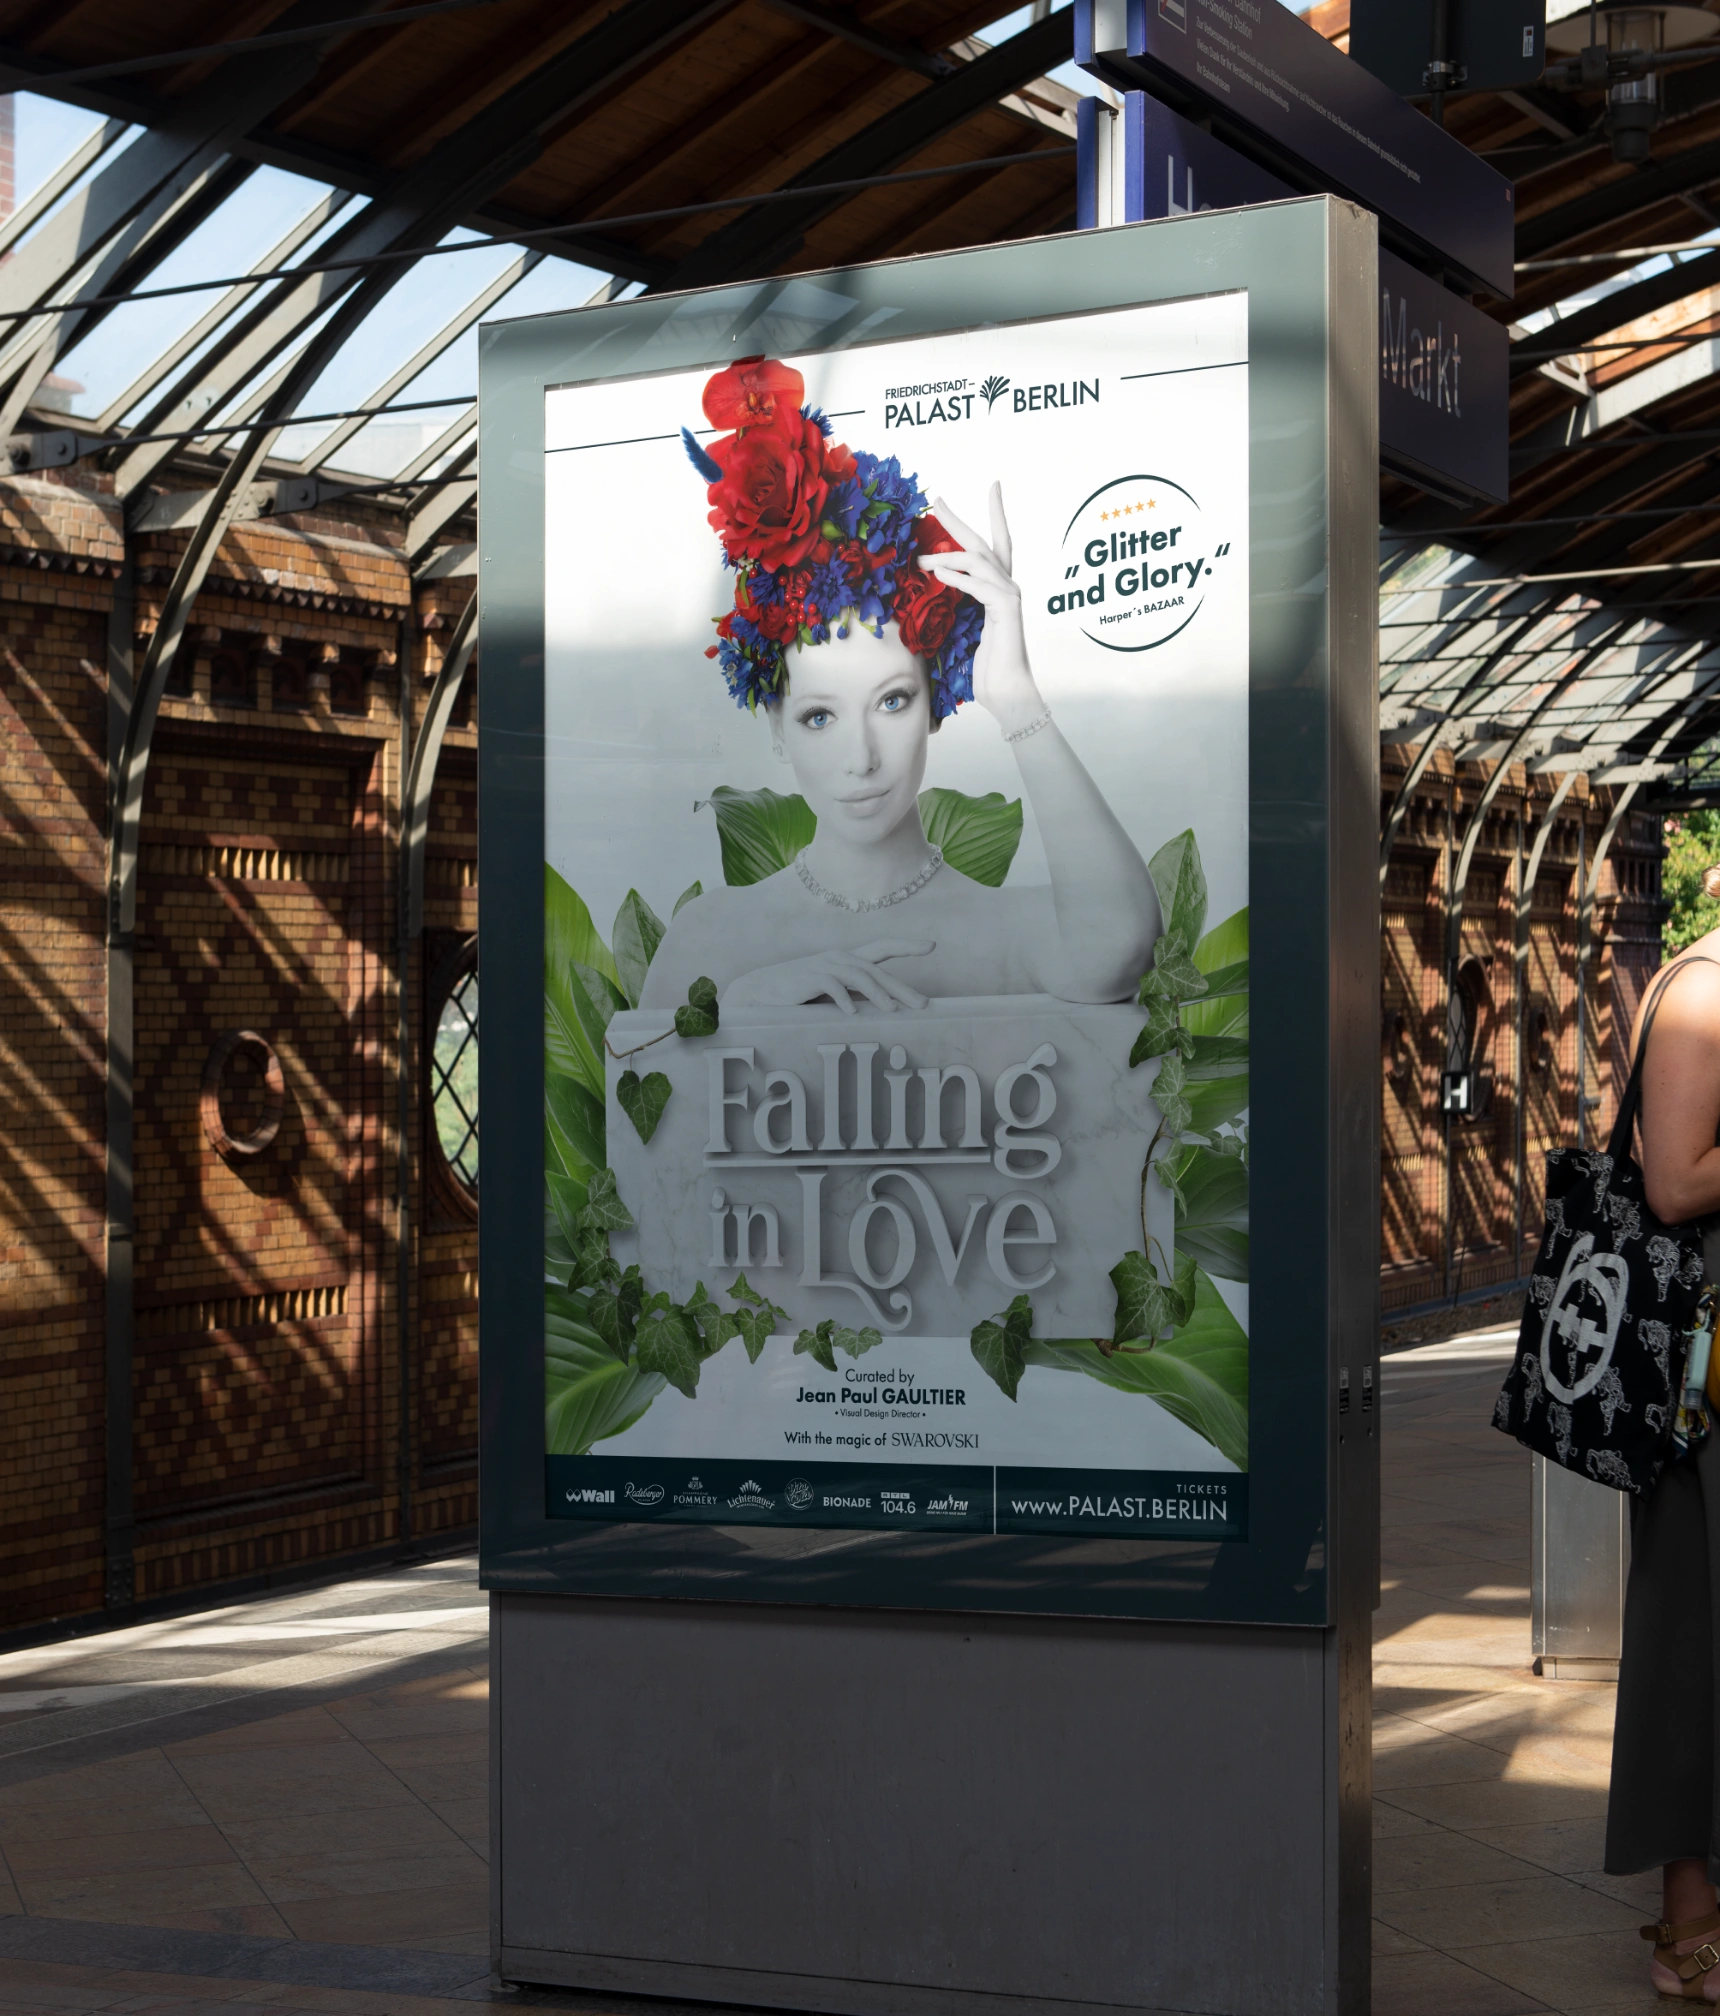 One picture shows a poster of the Friedrichstadtpalast Berlin Grand Show "Falling in Love" at a train station.